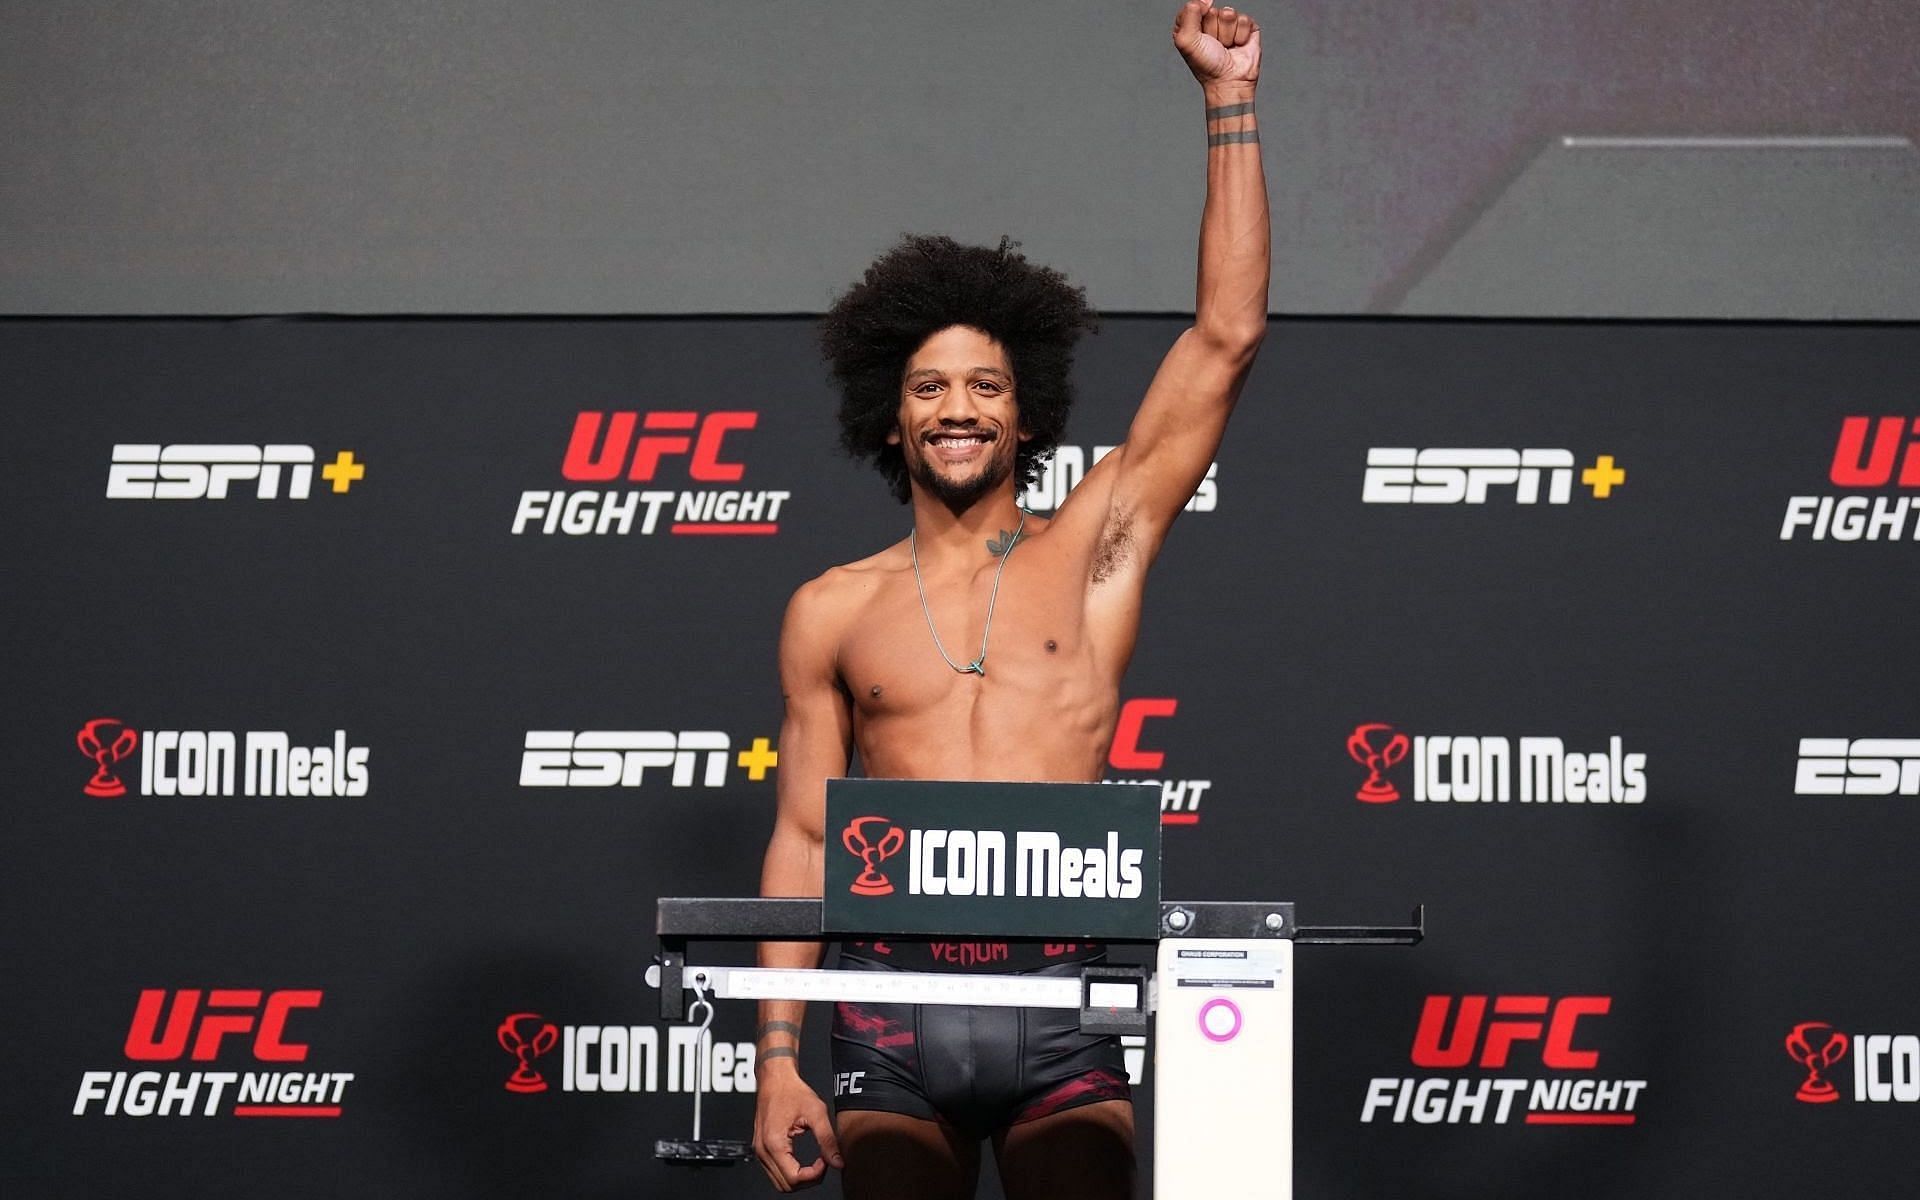 Alex Caceres pulled out the best finish on last nights card